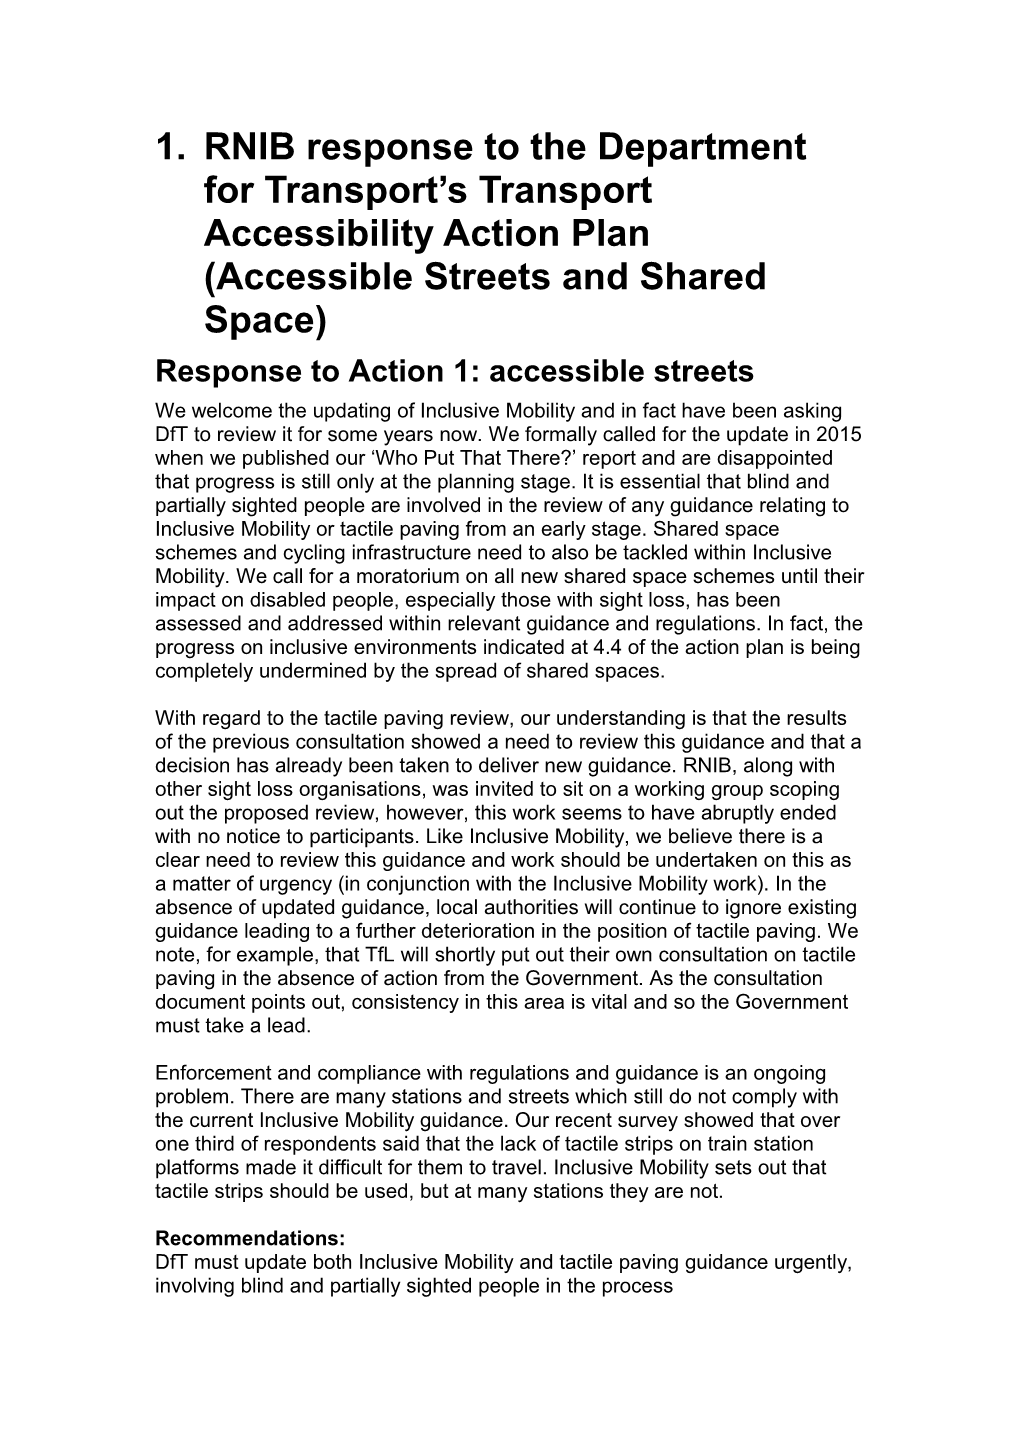 Response to Action 1:Accessible Streets